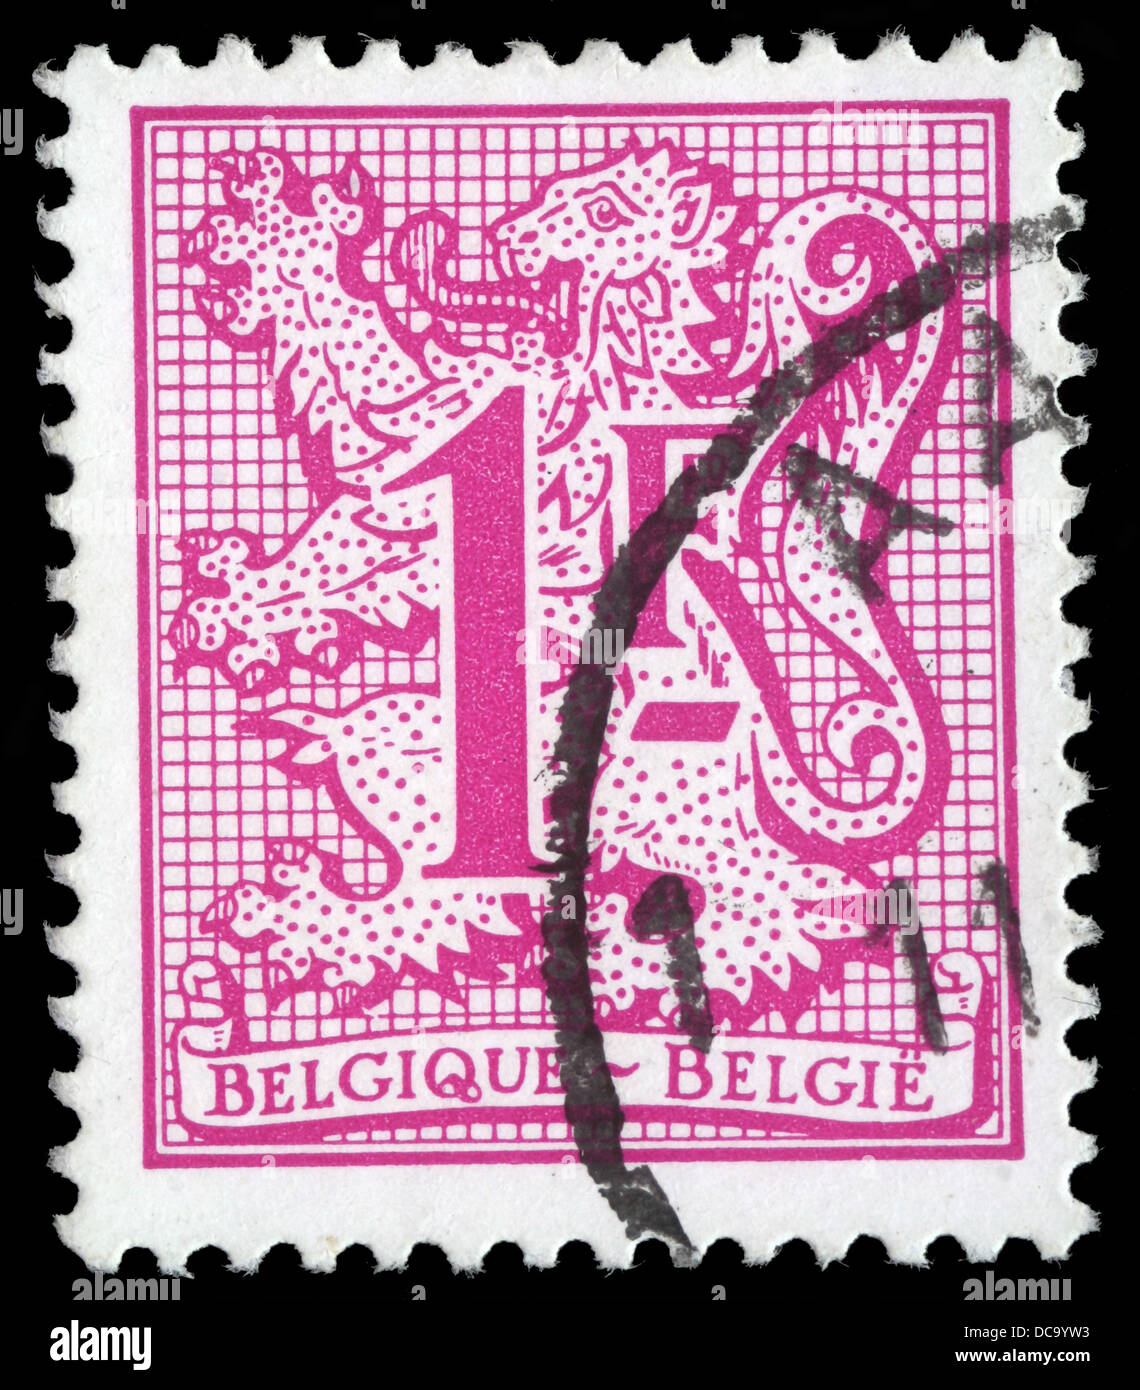 BELGIUM-1951:A stamp printed in BELGIUM shows The coat of arms of the Kingdom of Belgium bears a lion, called the Belgian Lion Stock Photo